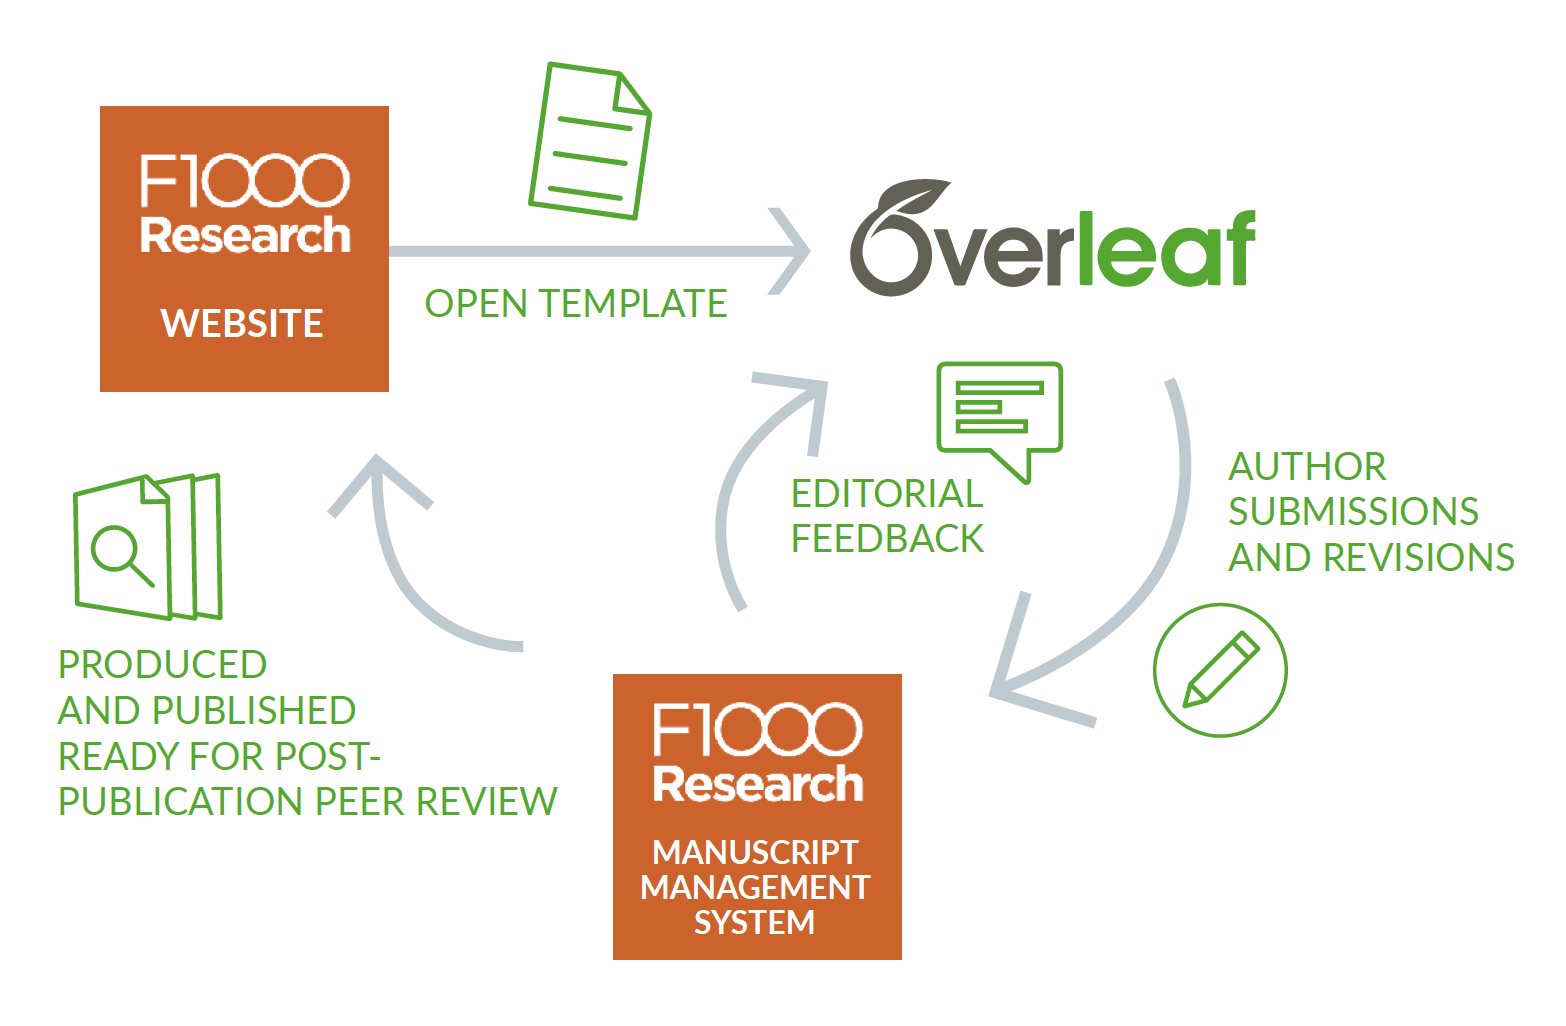 Overleaf-F1000Research-workflow